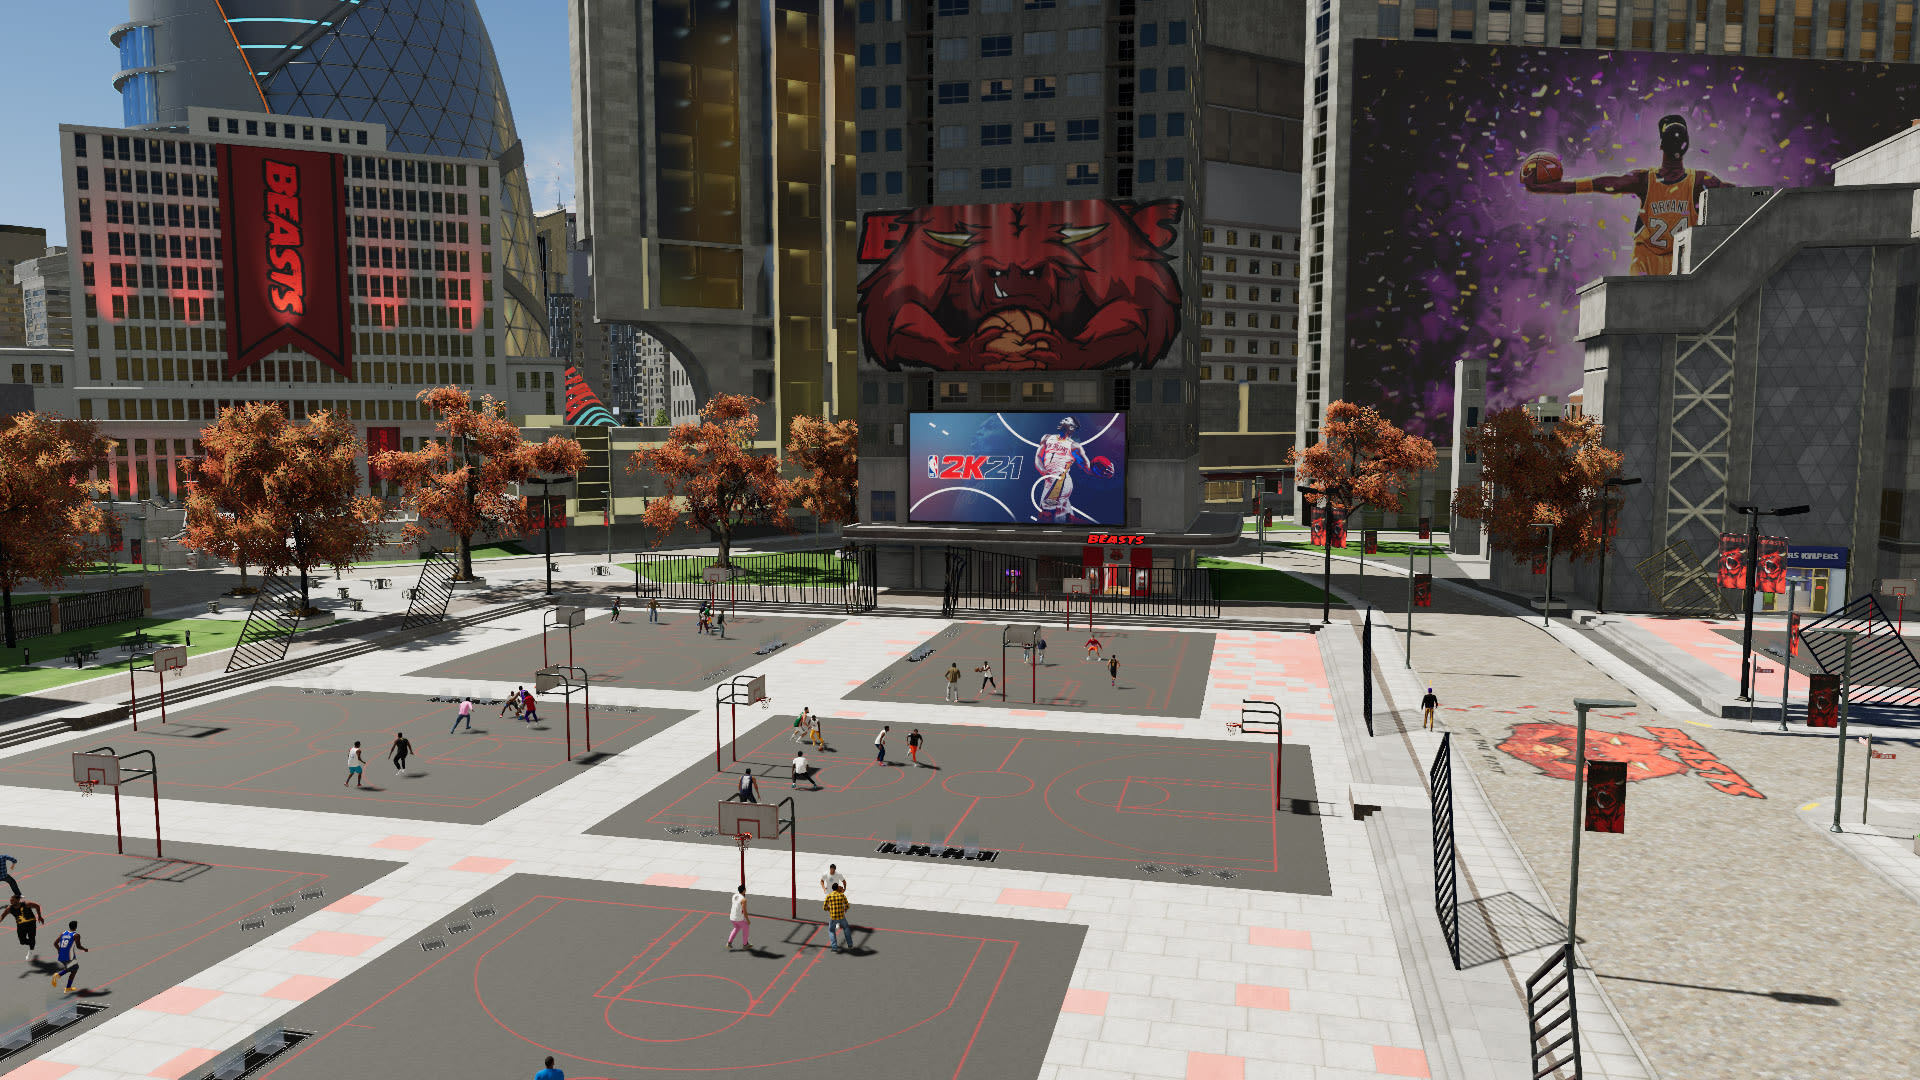 Nba 2k21 S The City Is The New Open World Game Mode Shaping The Future Of Complex